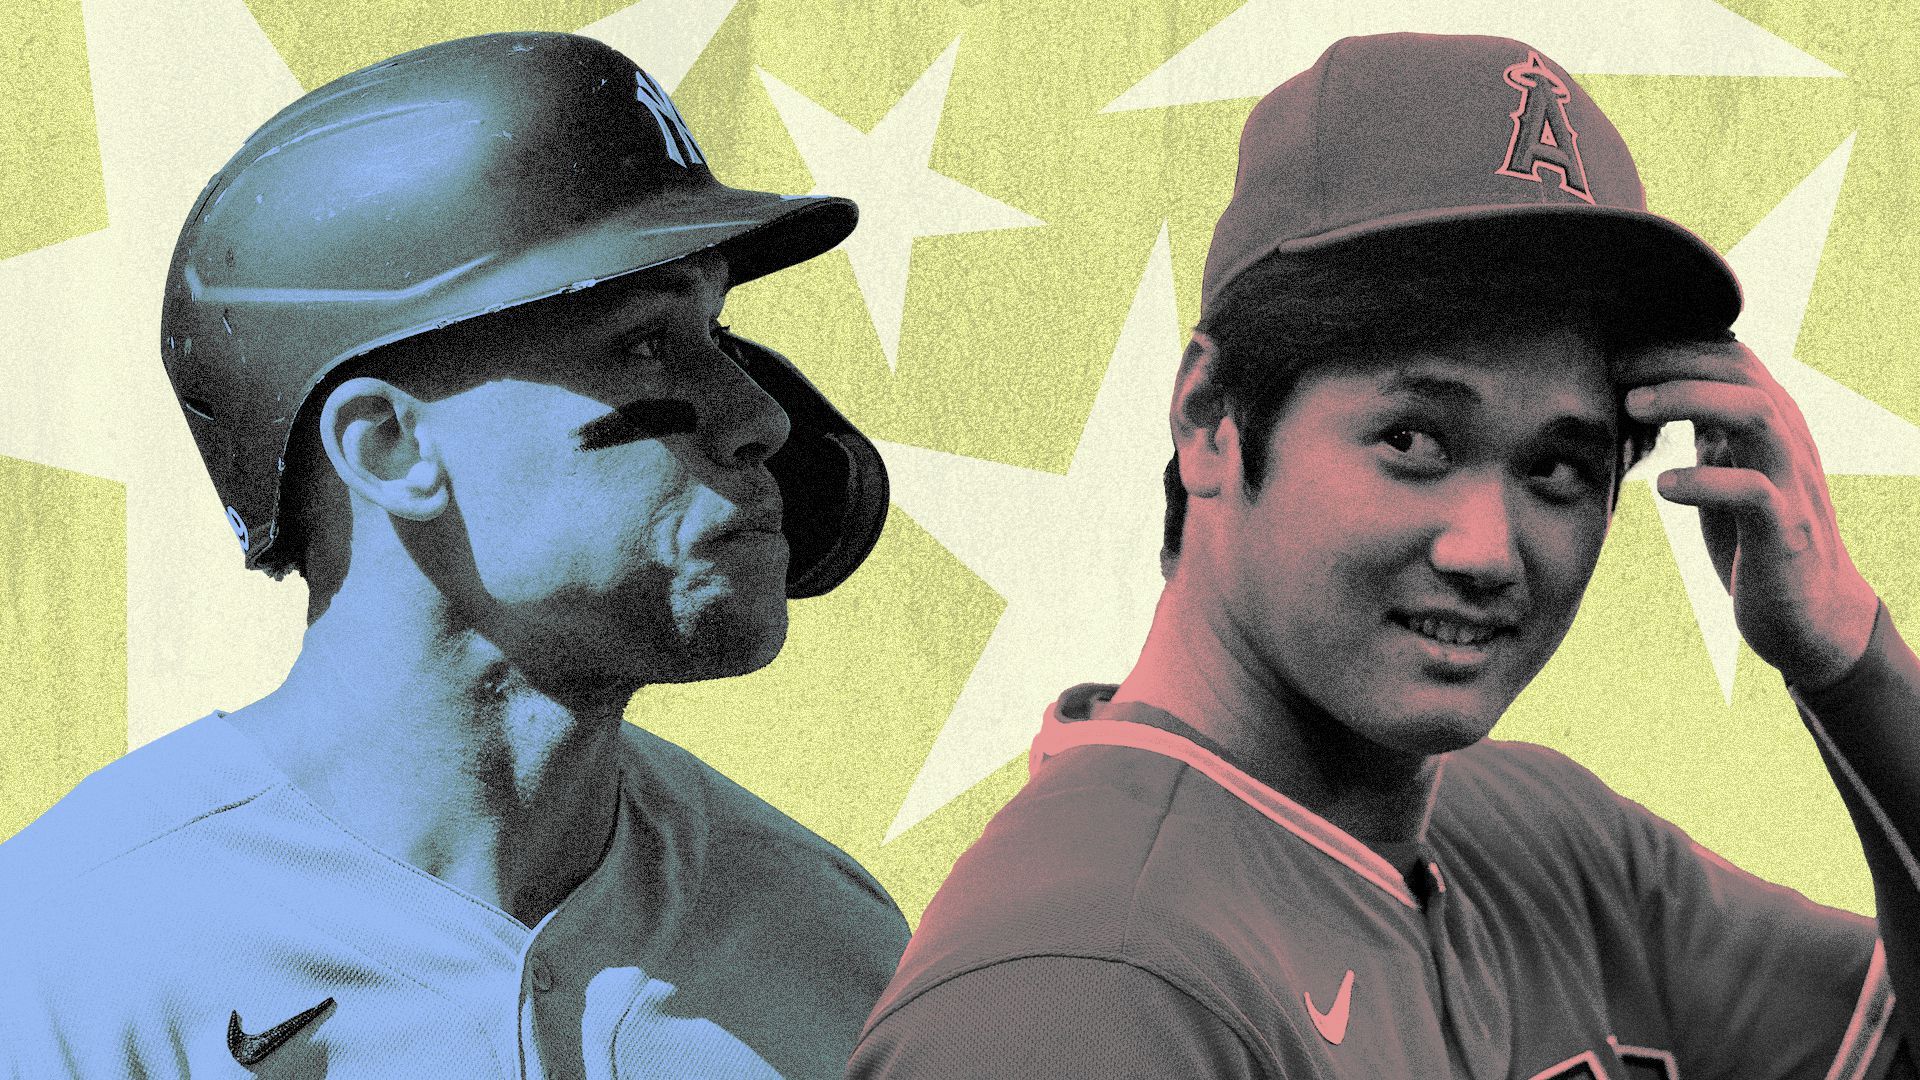 2022 MLB All-Star Game rosters: Shohei Ohtani, Aaron Judge